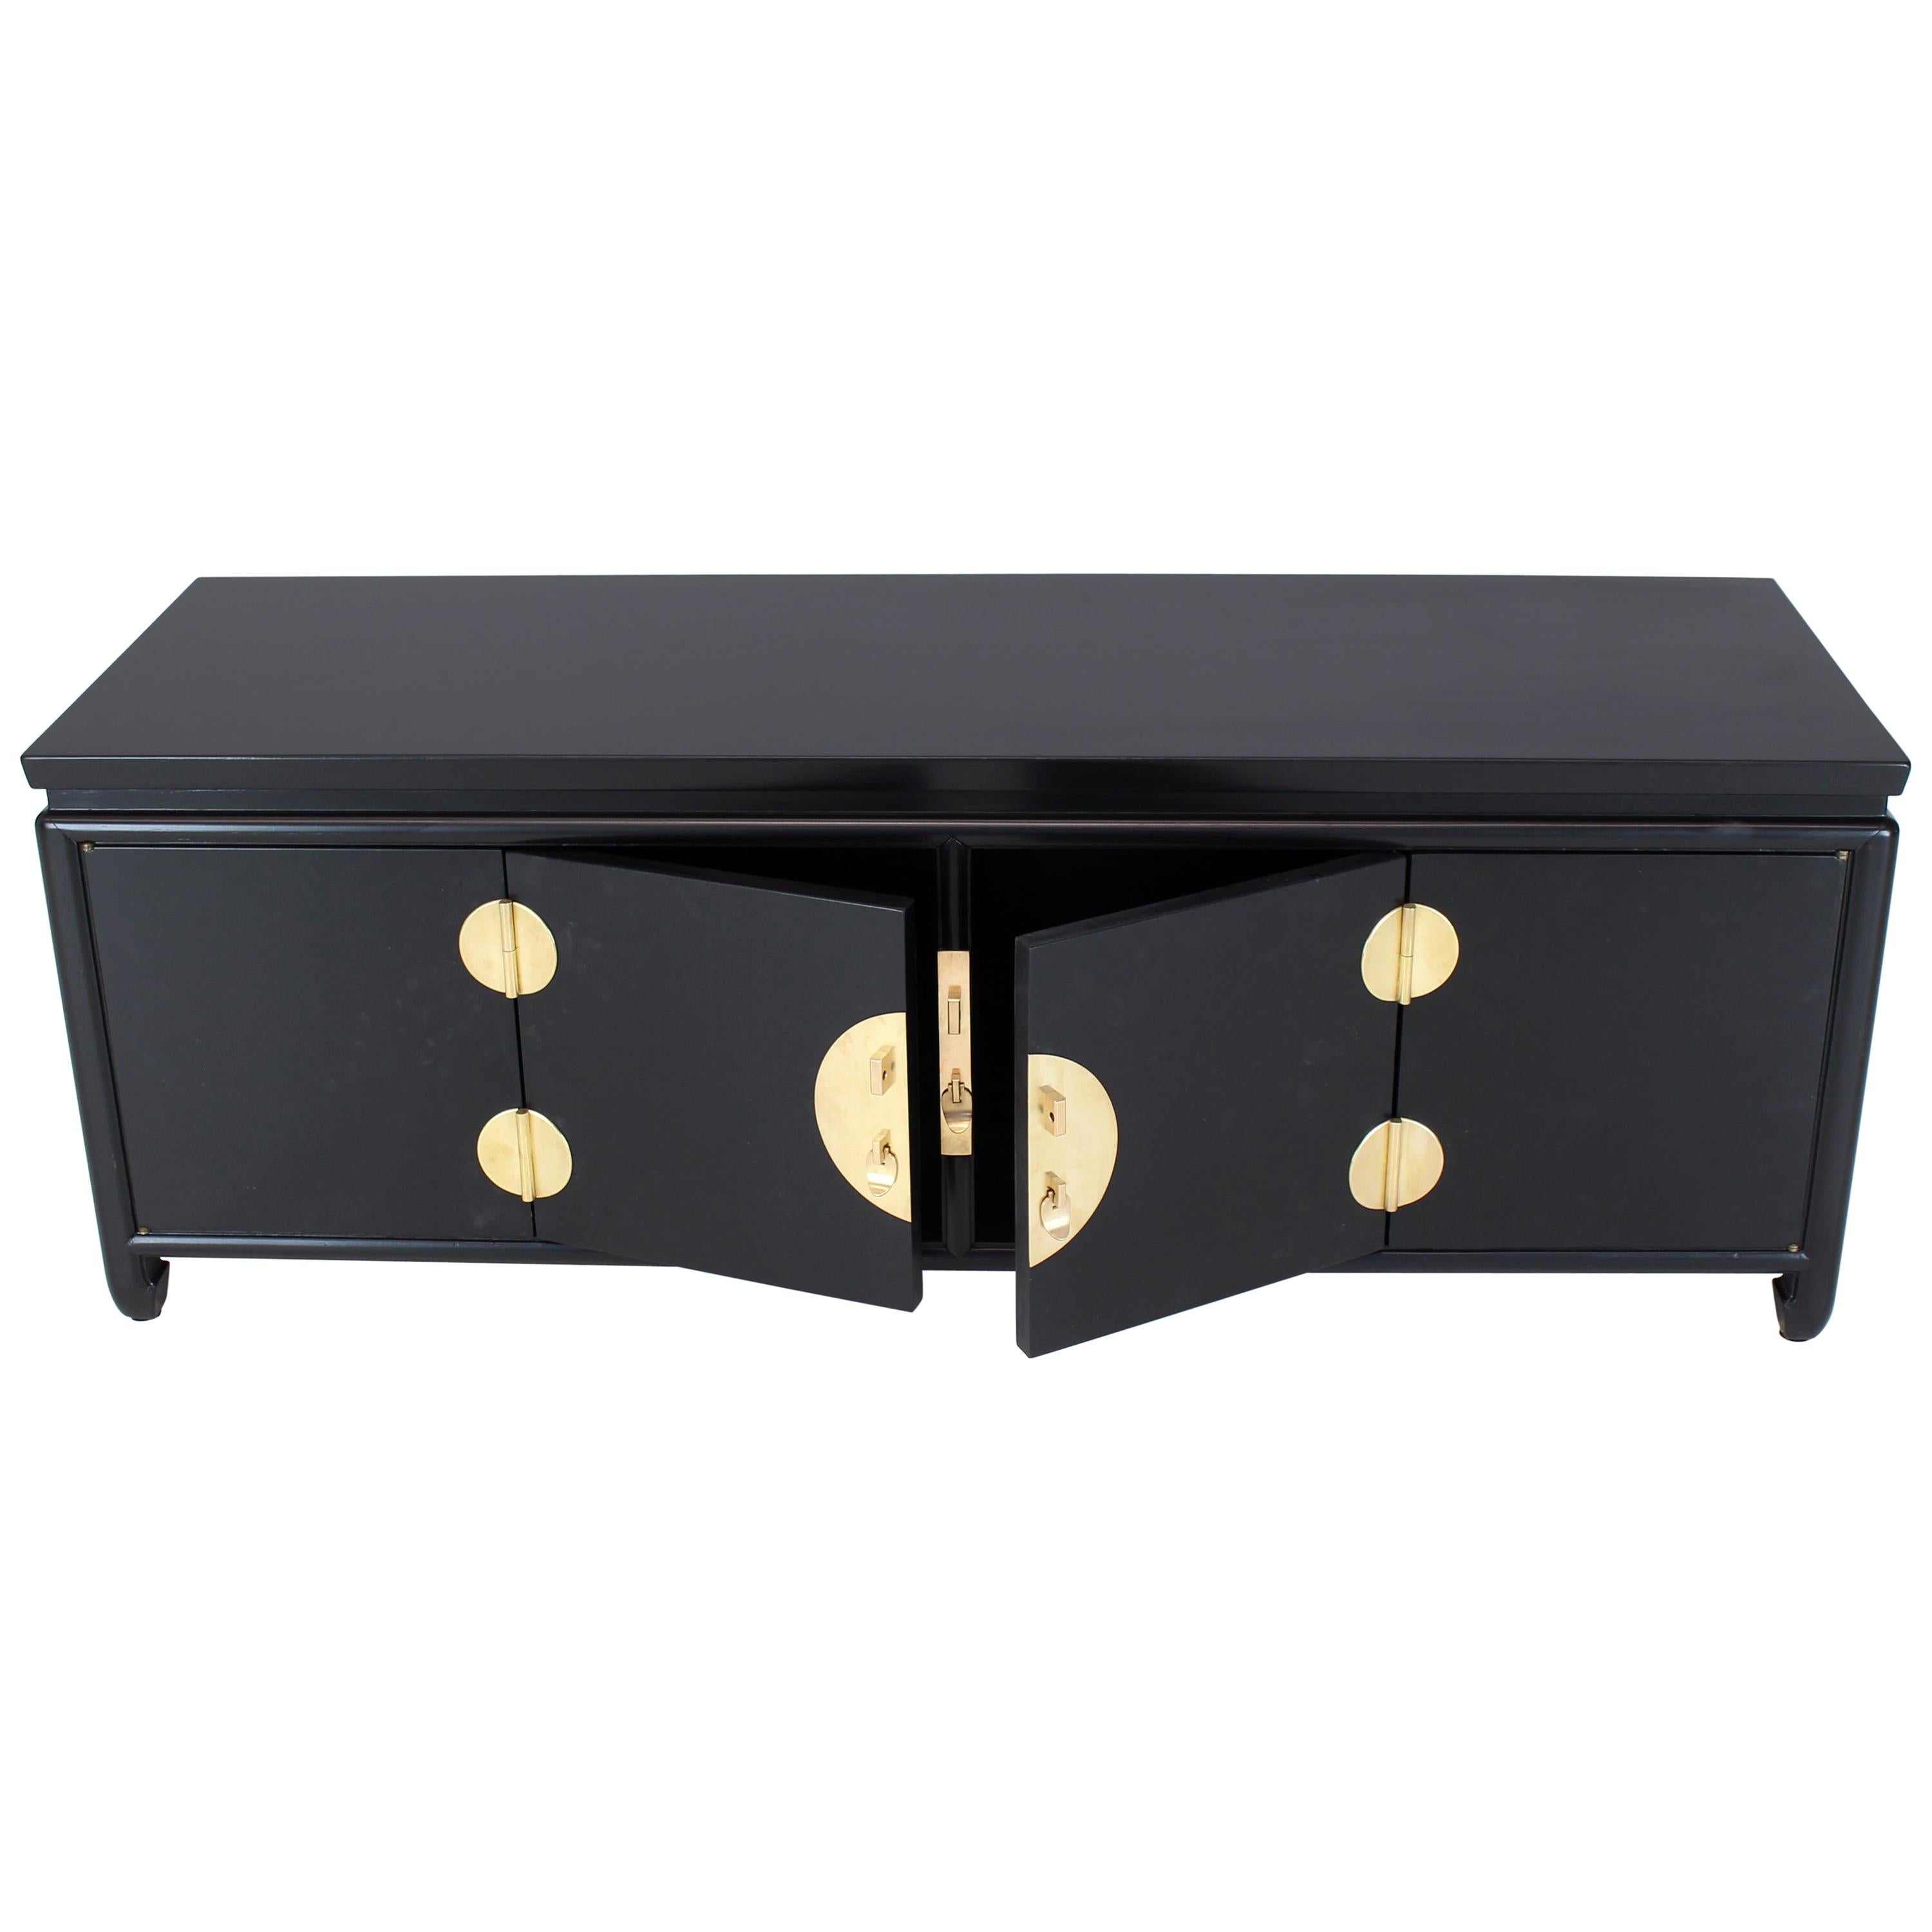 Black Ebonized Low Petite Small Credenza Stand with Solid Brass Hardware Pulls For Sale